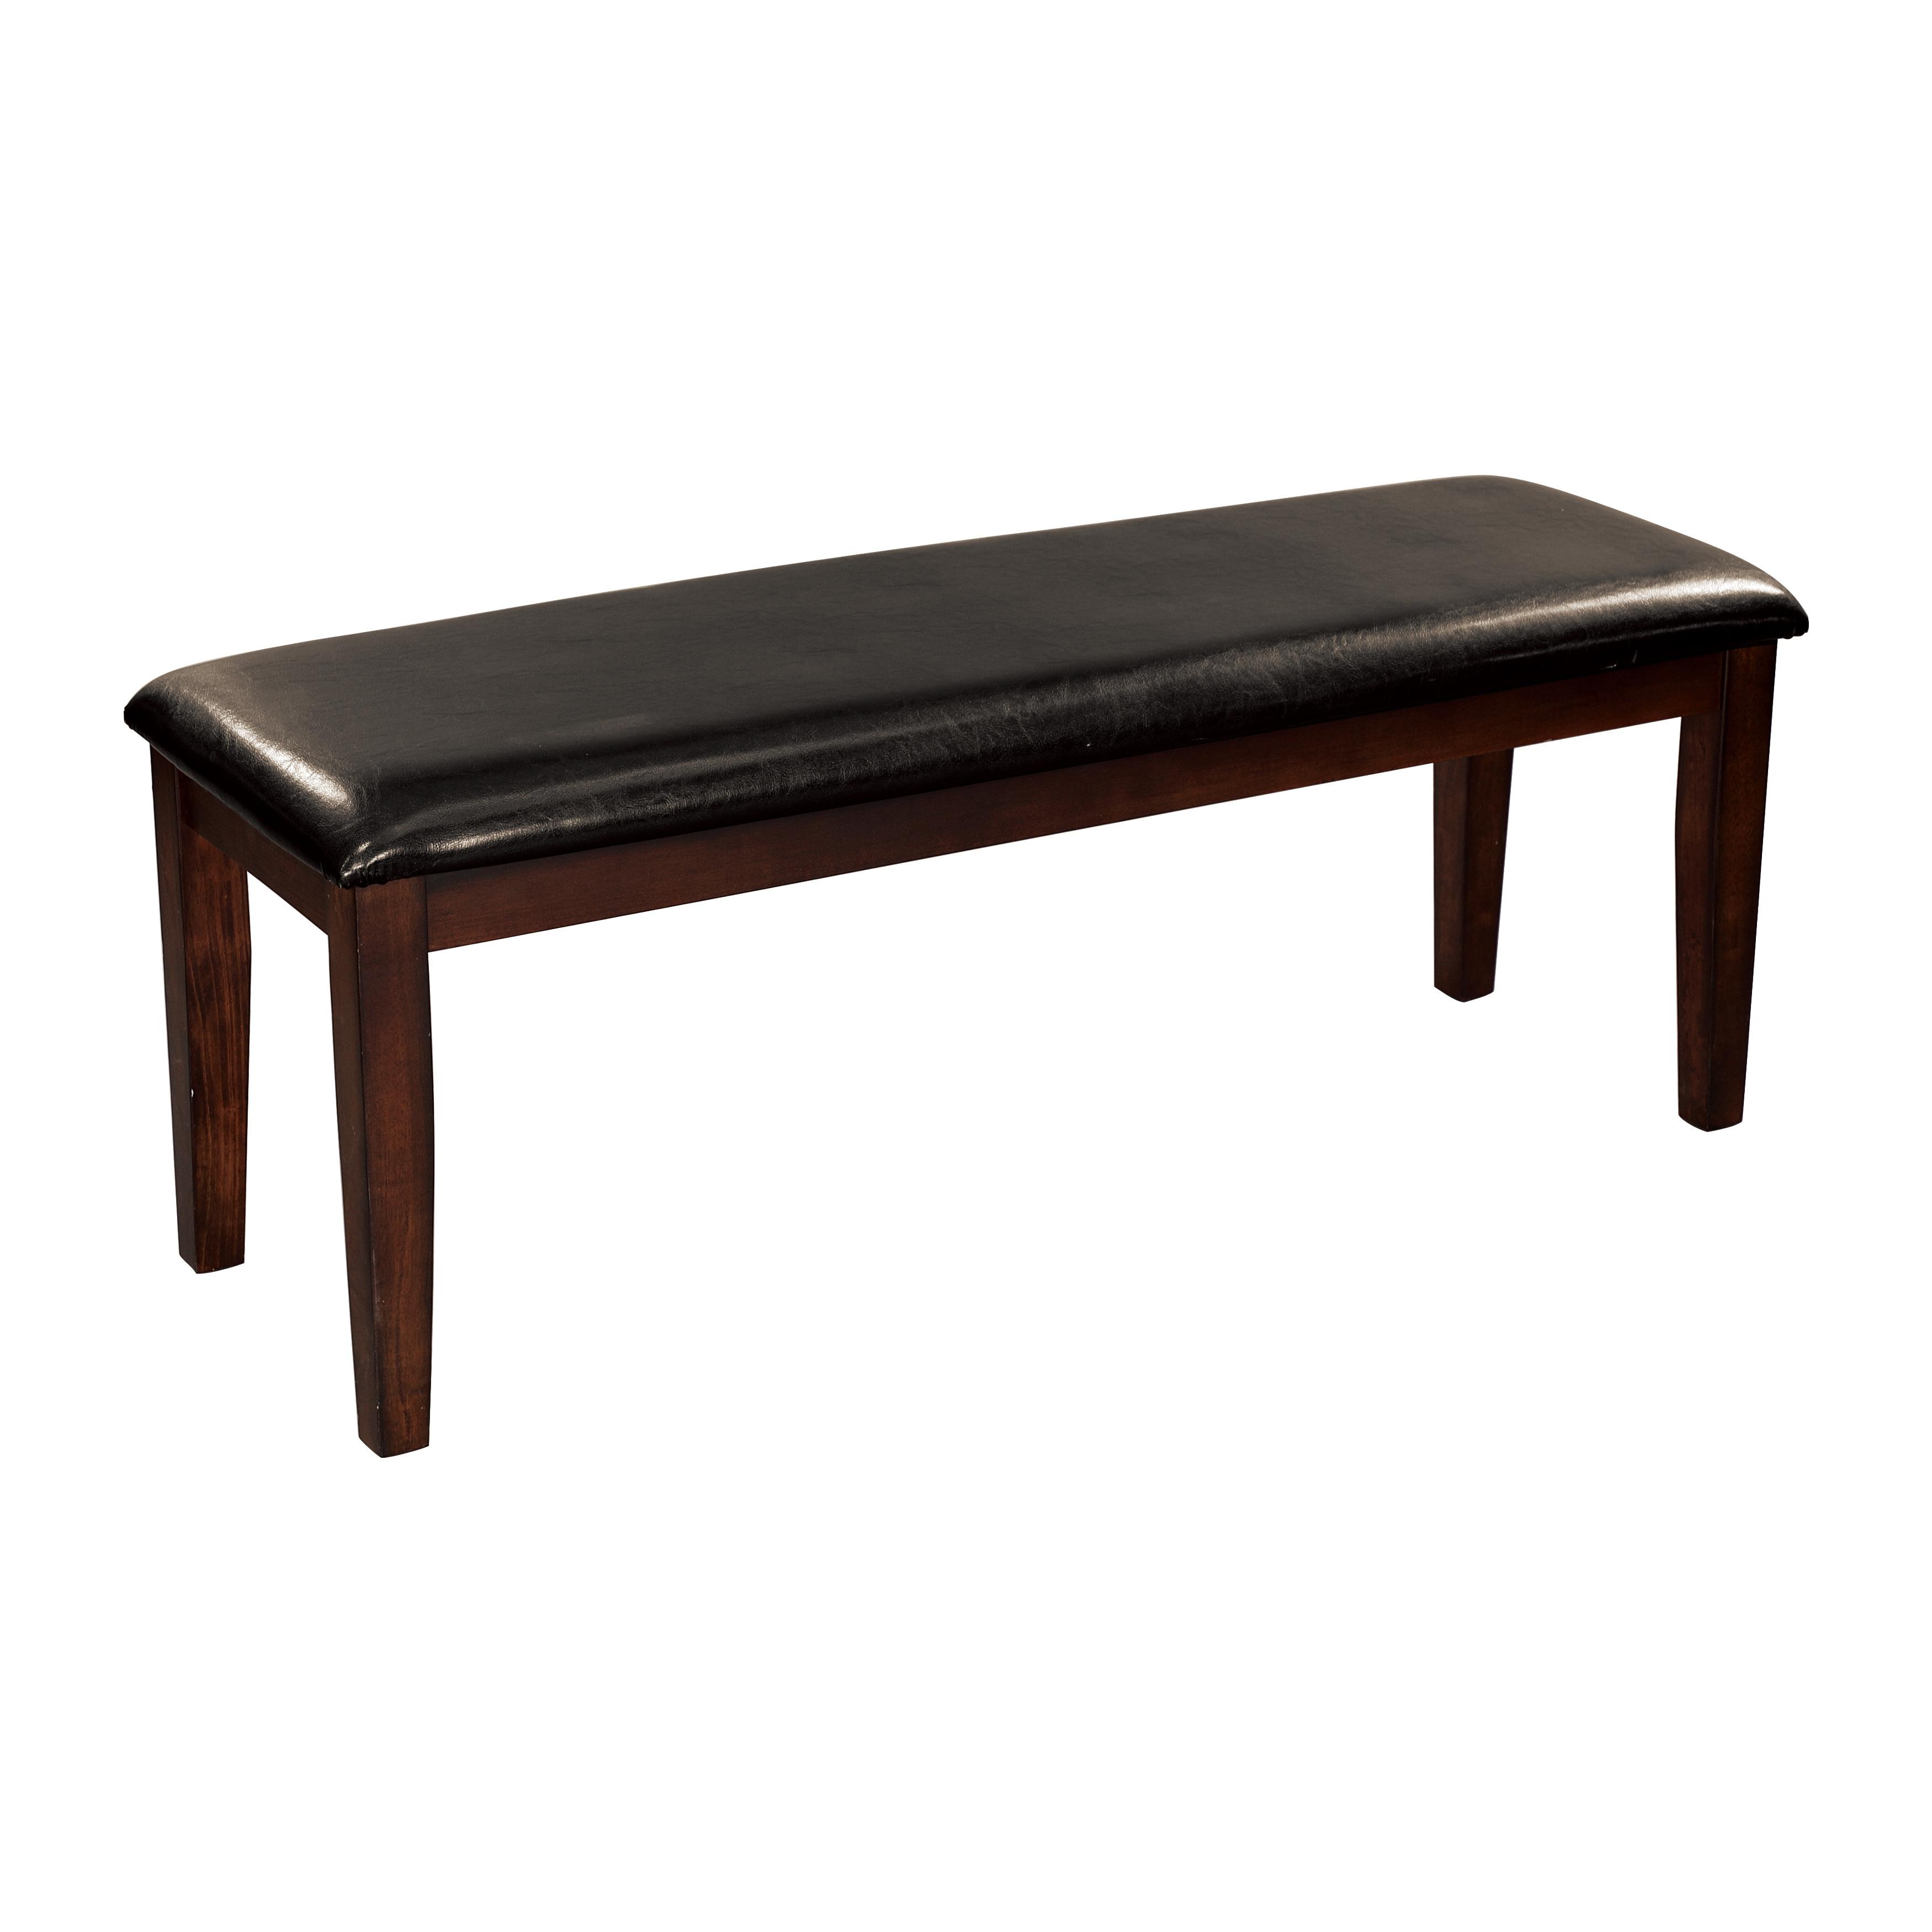 Transitional Dining Bench 5547-13 Mantello 5547-13 in Cherry Faux Leather